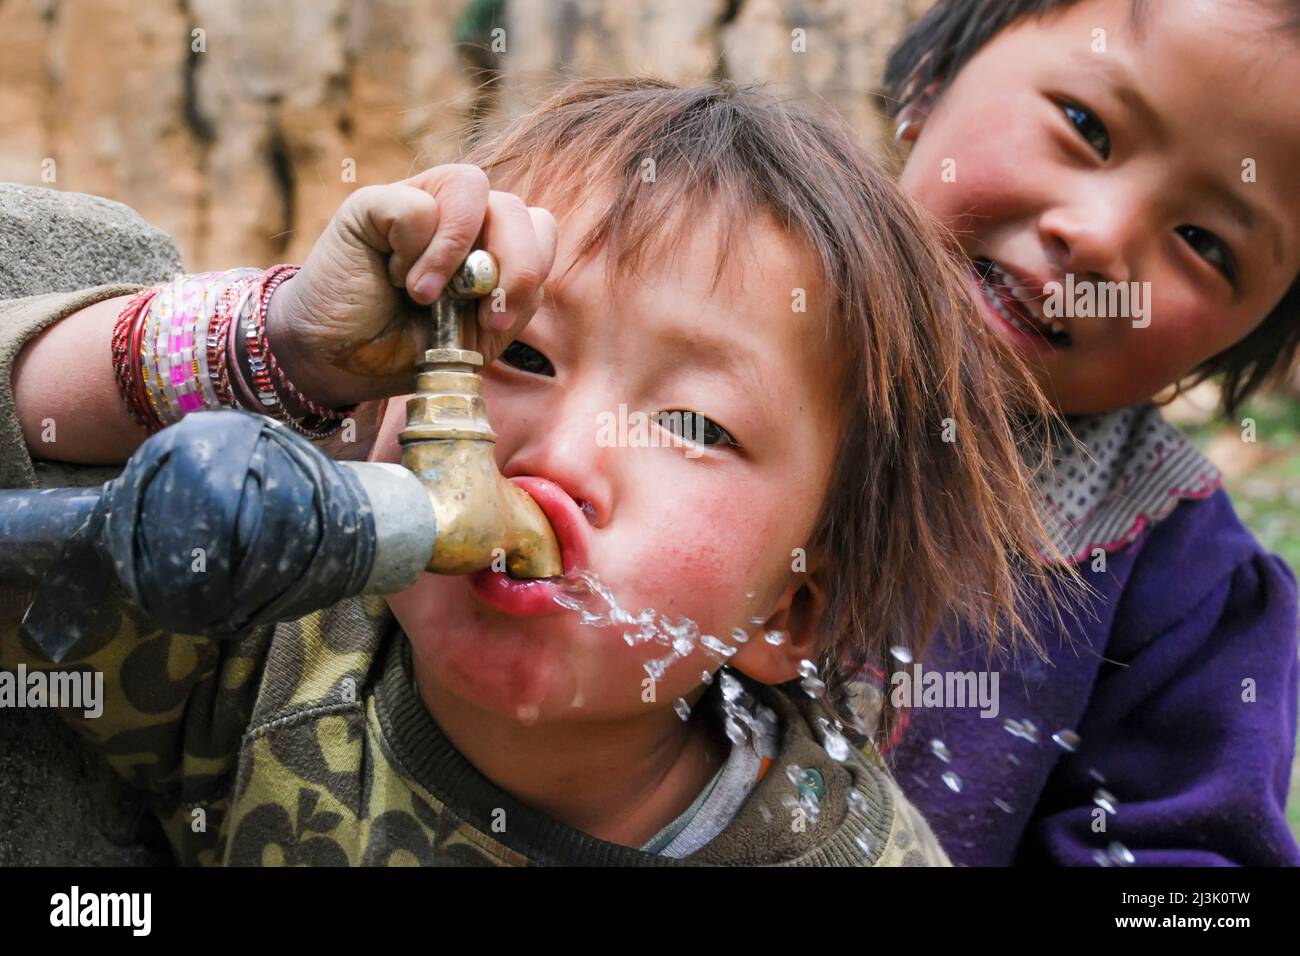 In a Phobjika village, a young girl drinks water from a spigot as another girl looks on; Phobjika, Bhutan Stock Photo